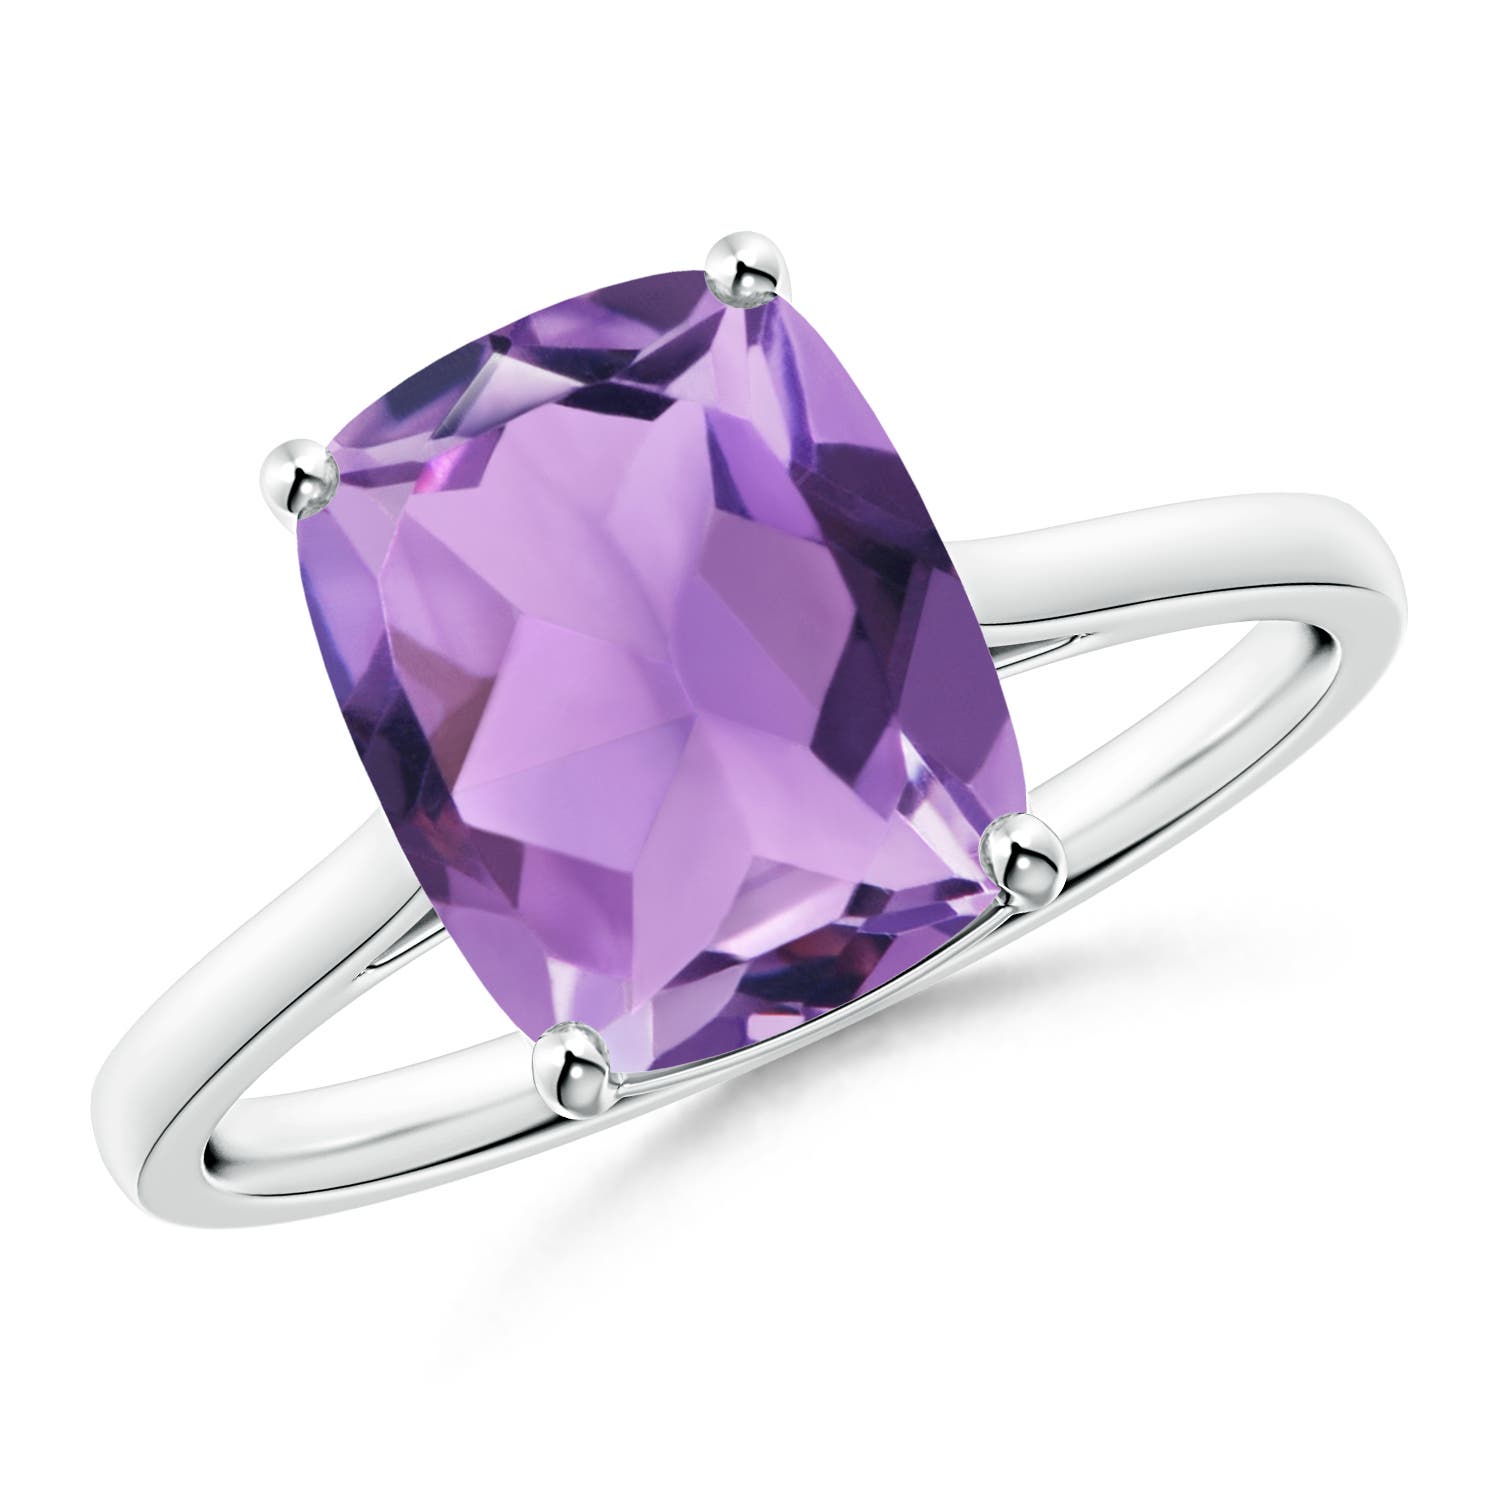 A - Amethyst / 2.7 CT / 14 KT White Gold